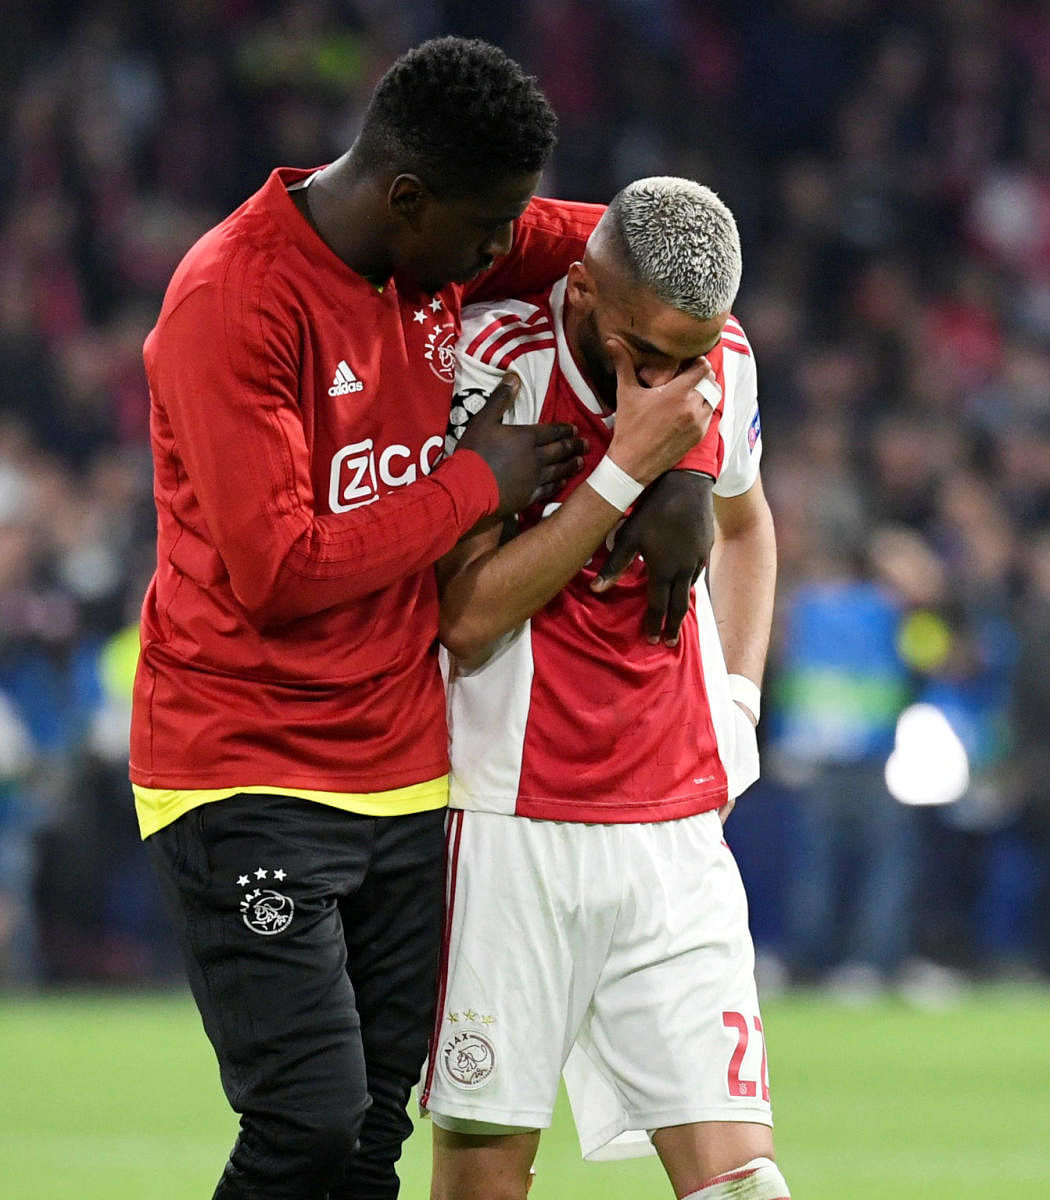 GUTTED: Hakim Ziyech (right) is consoled by a team-mate after Ajax's heartbreaking defeat to Tottenham Hotspur in the second leg of the UEFA Champions League semifinals on Wednesday. Reuters.